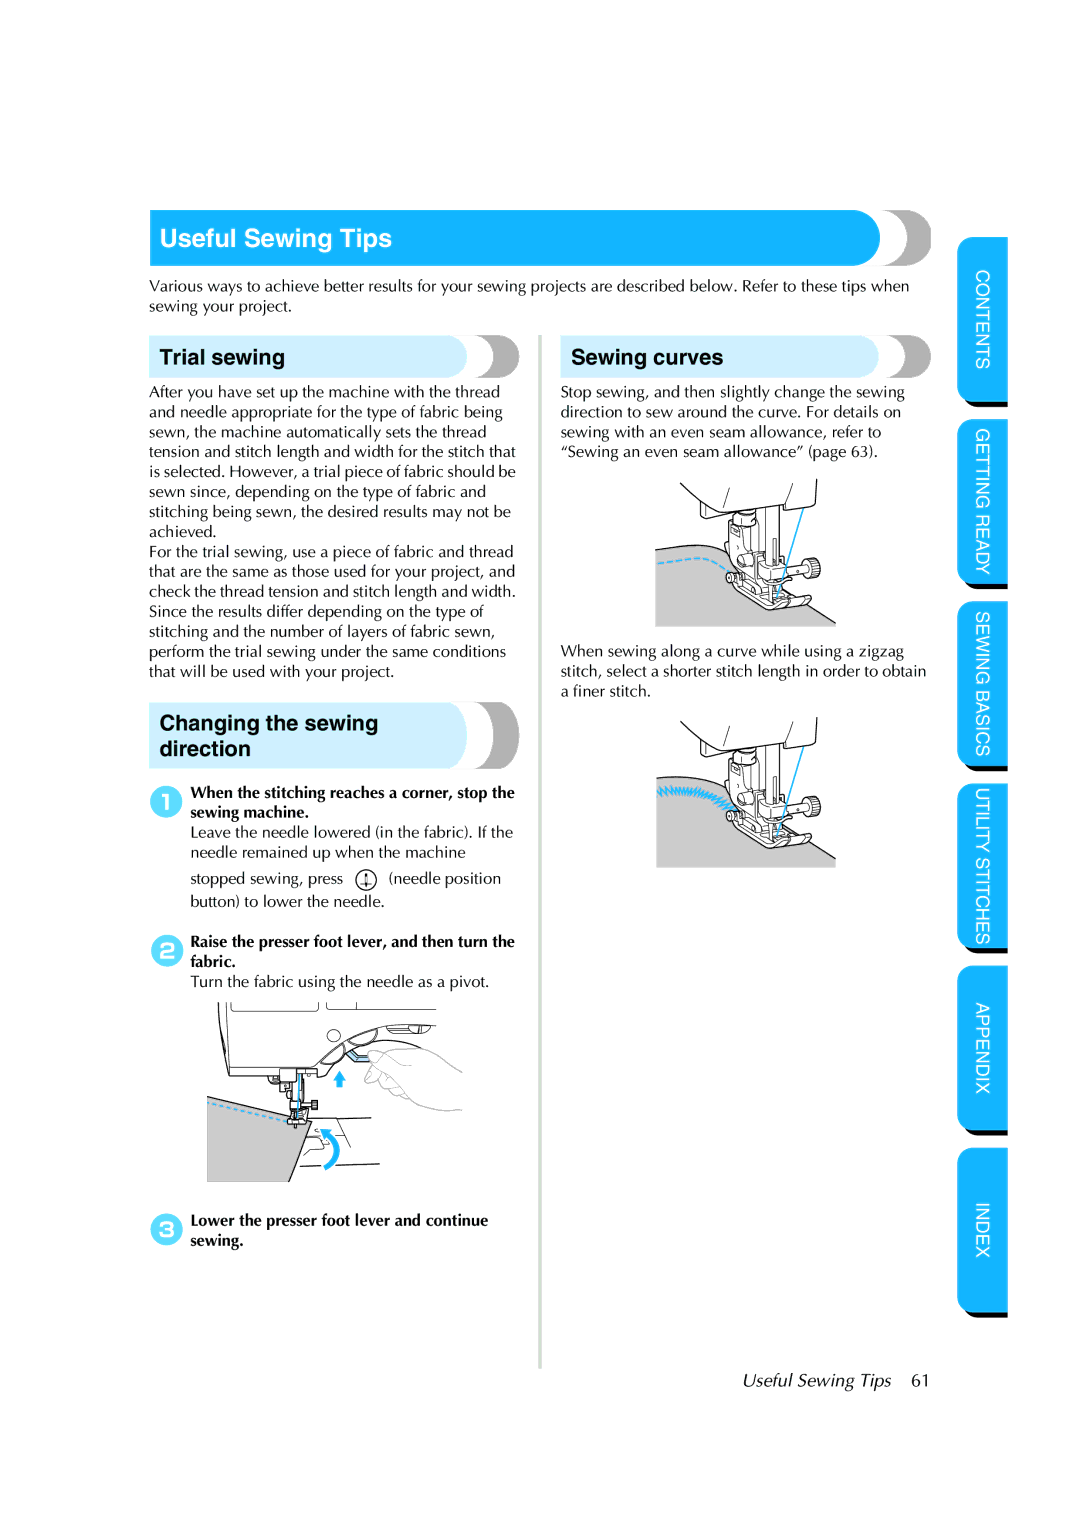 Brother CS-8150 manual Useful Sewing Tips, Trial sewing, Changing the sewing direction, Sewing curves 